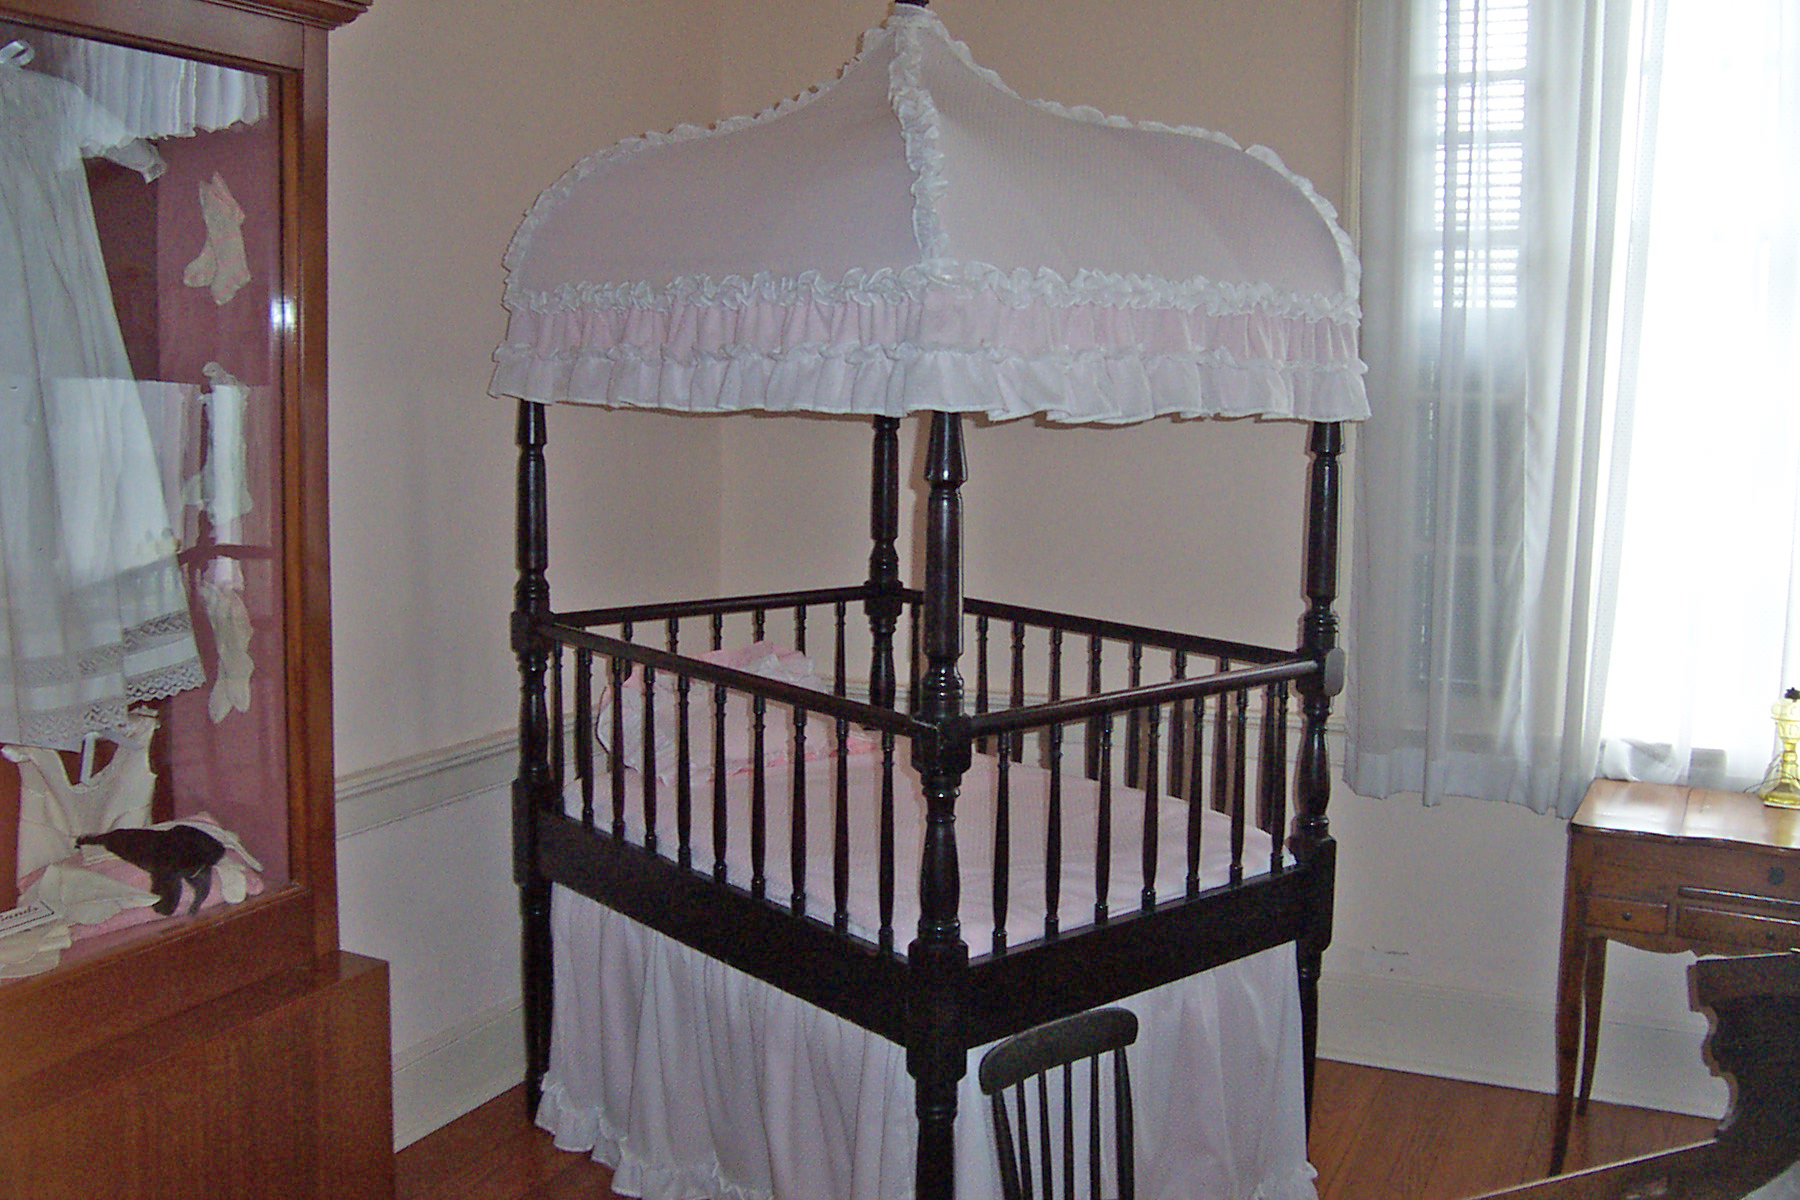 a crib used by Jefferson Davis's son at first white house of the confederay